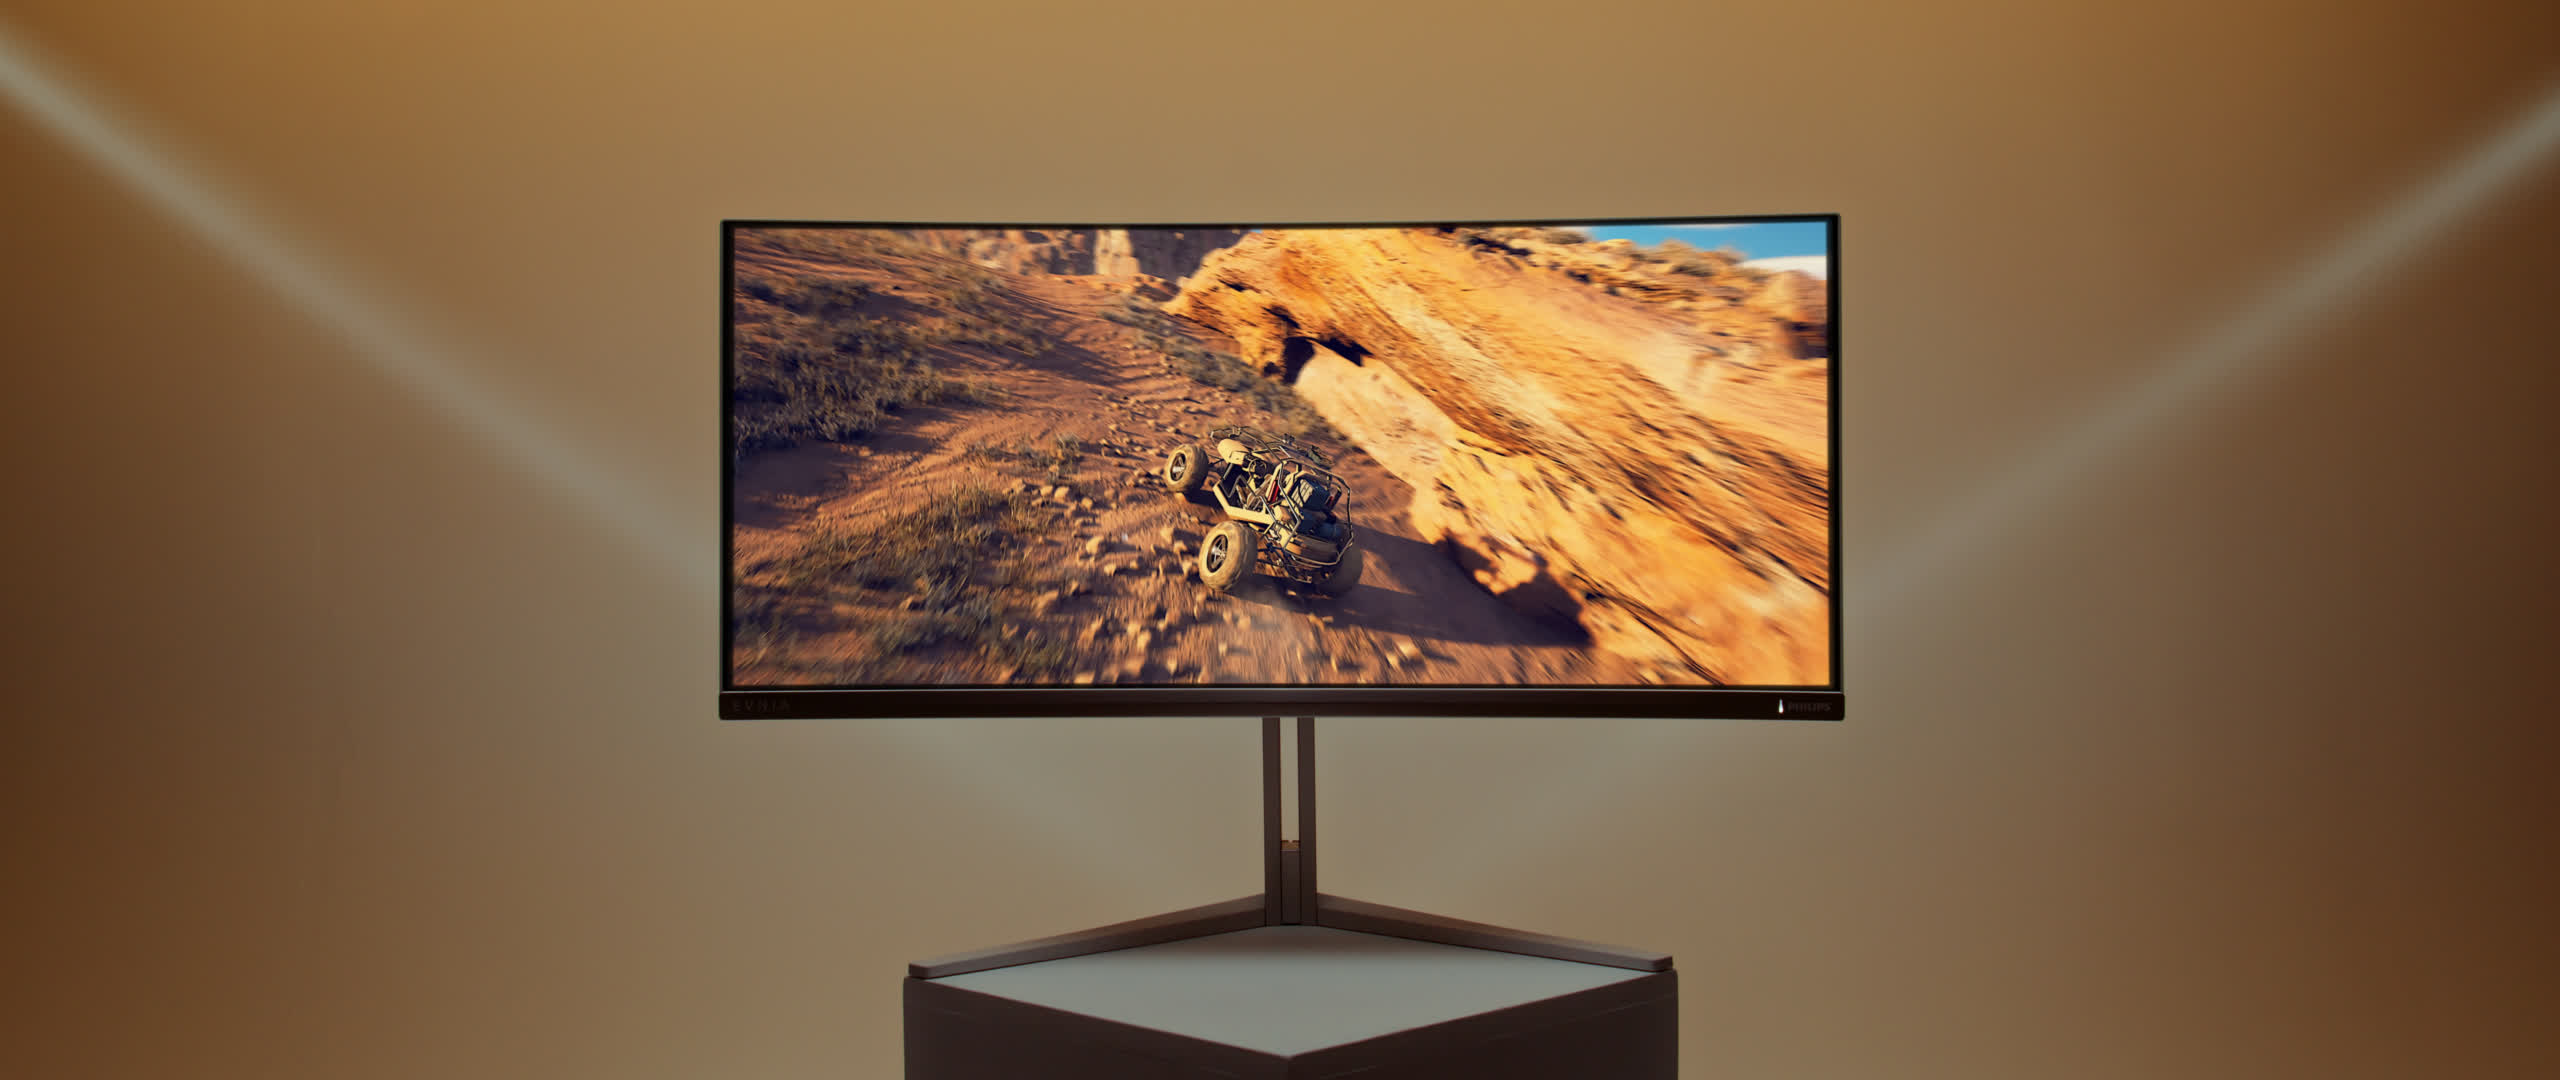 Philips releases 34-inch and 42-inch OLED gaming monitors